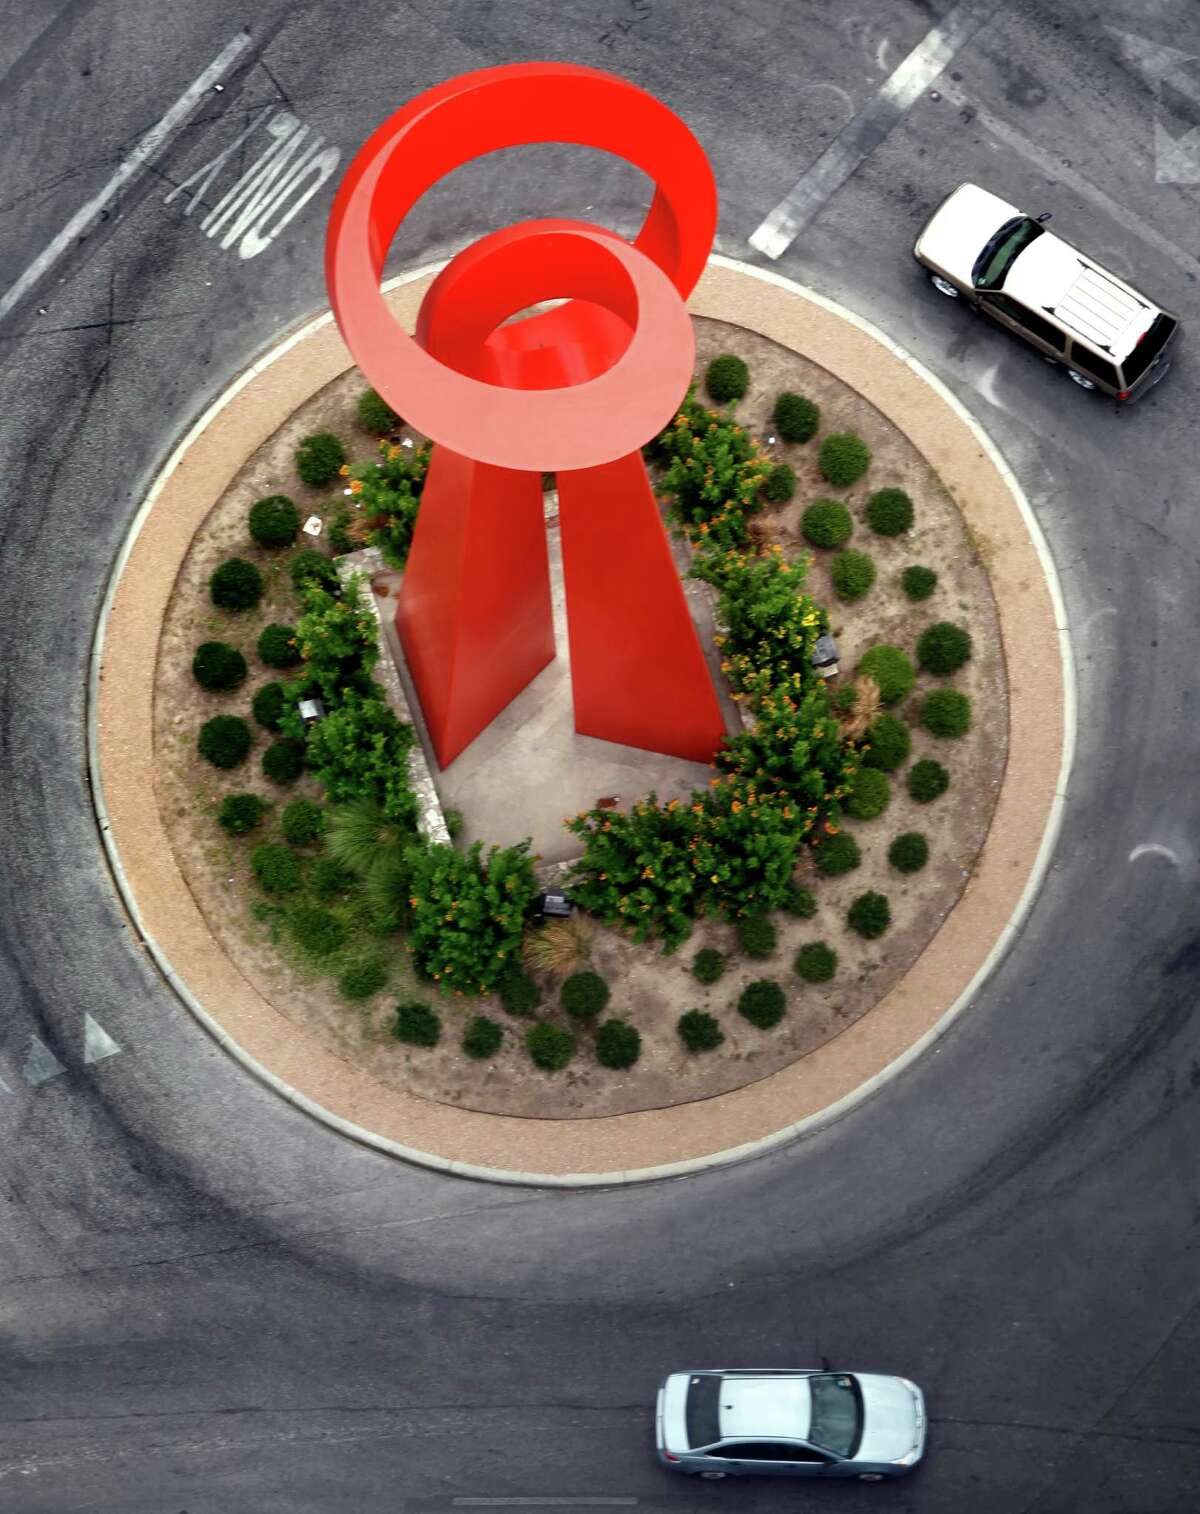 The Torch of Friendship at the intersection of Alamo, Commerce, and Market Streets in downtown San Antonio, Texas is seen in a Friday July 1, 2011 aerial photo (William Luther/wluther@express-news.net)